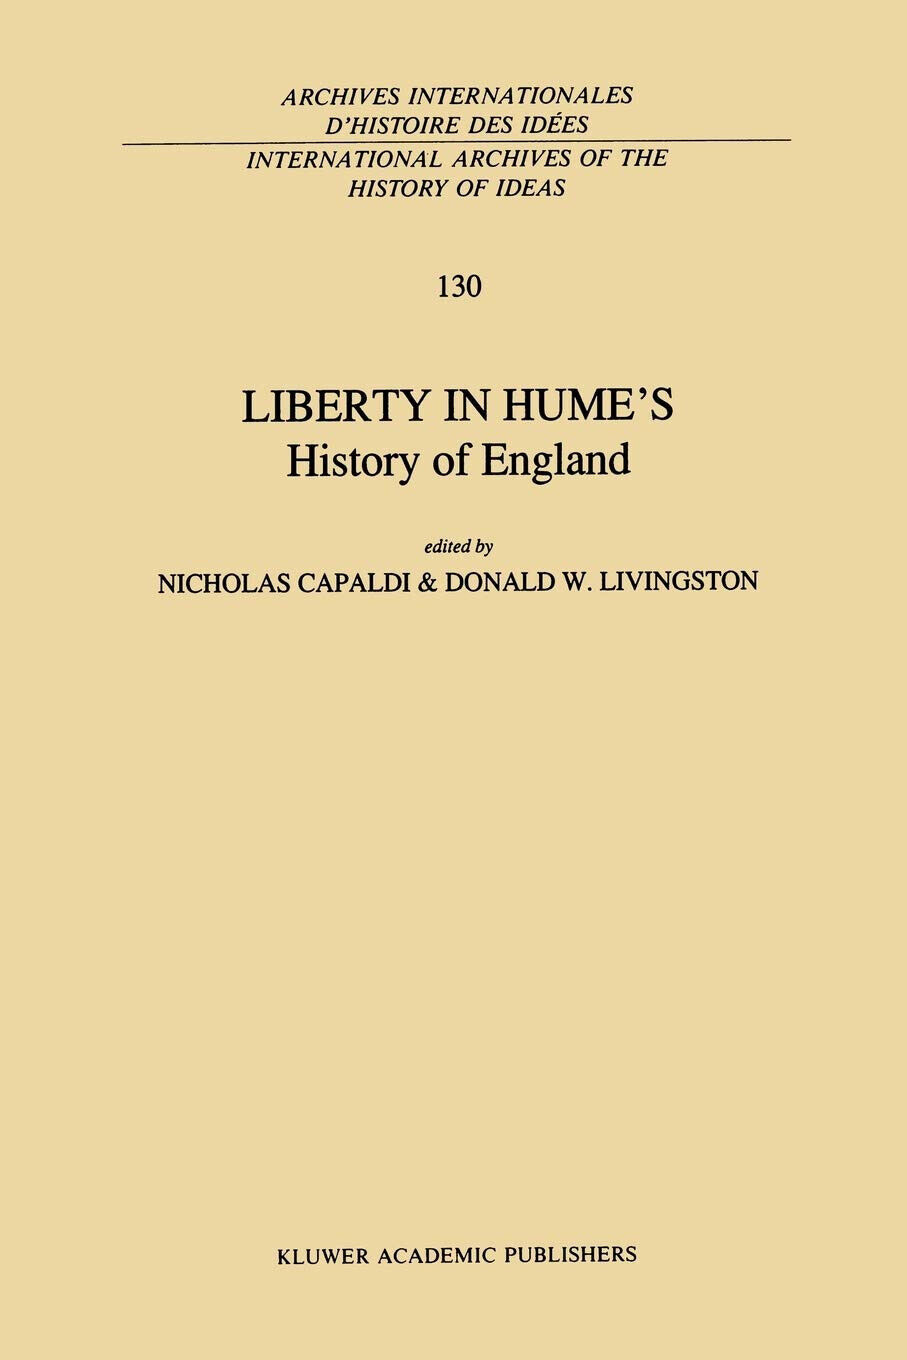 Liberty in Hume s History of England - N. Capaldi - Springer, 2013